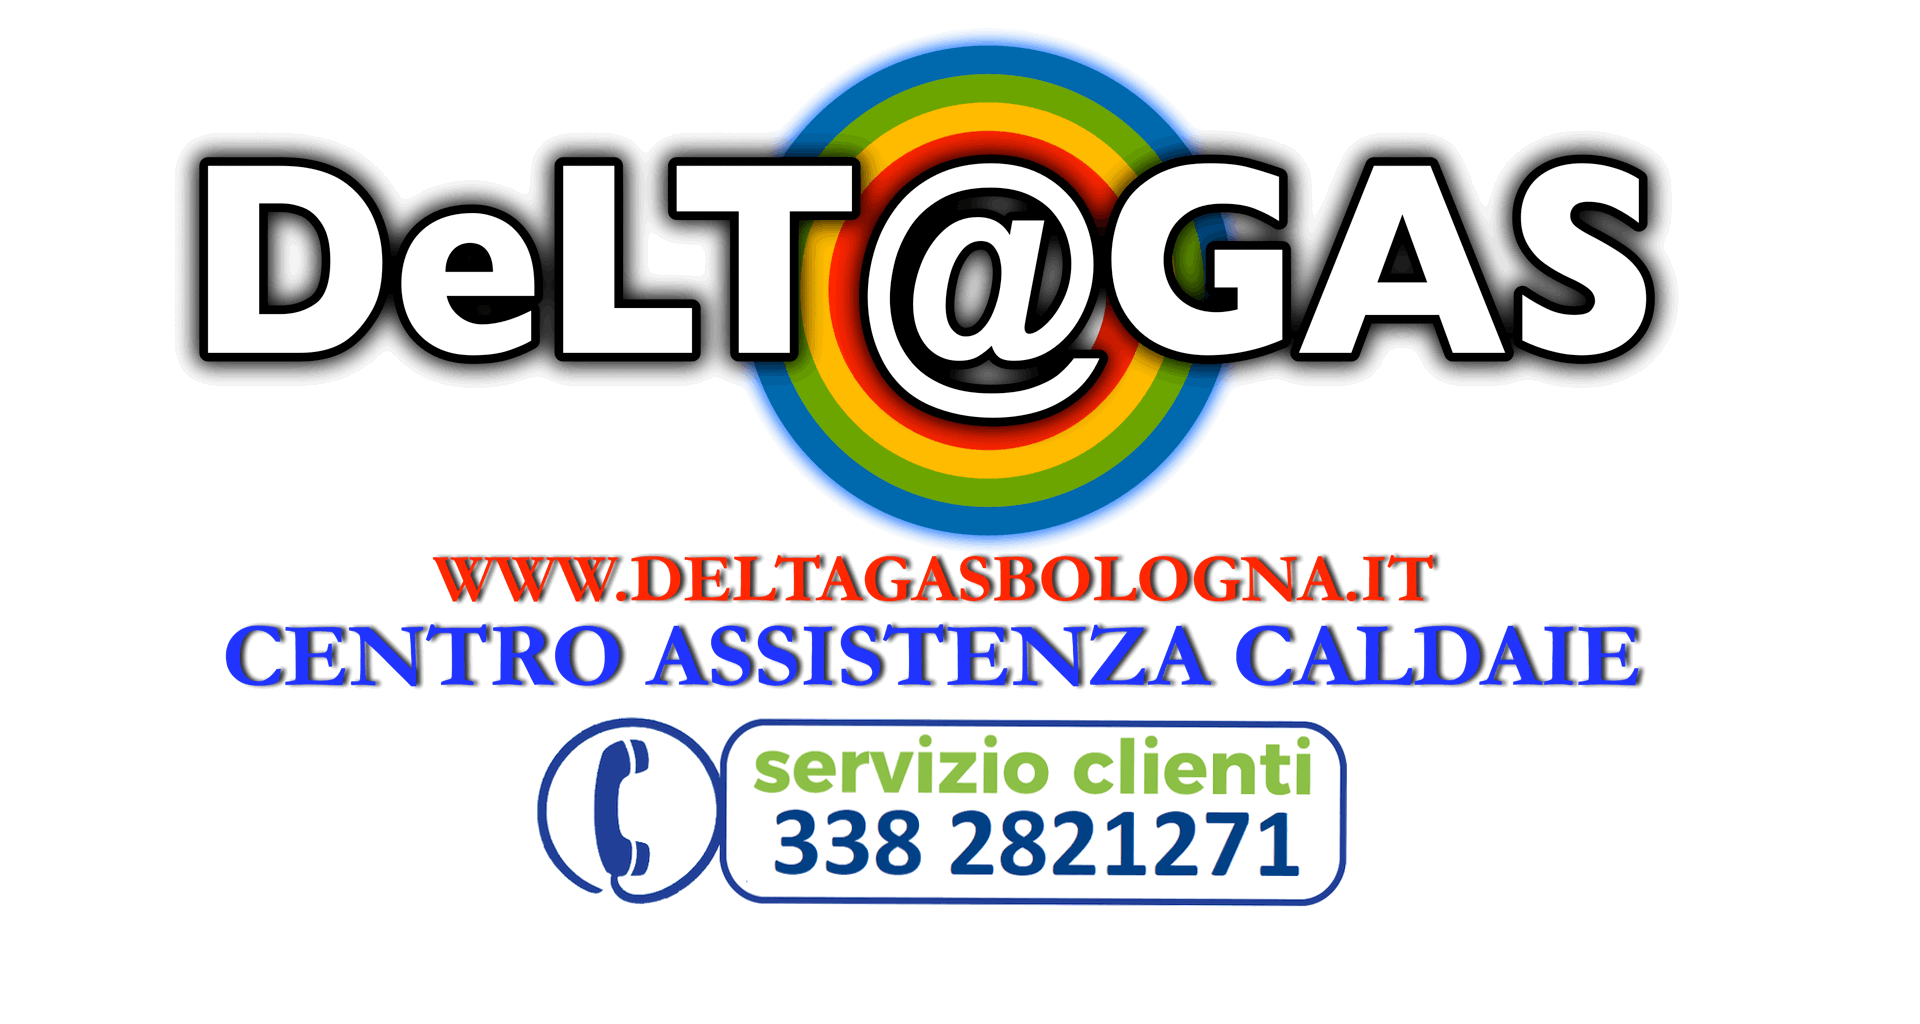 TEL. 051-0060398 CELL. 338-2821271